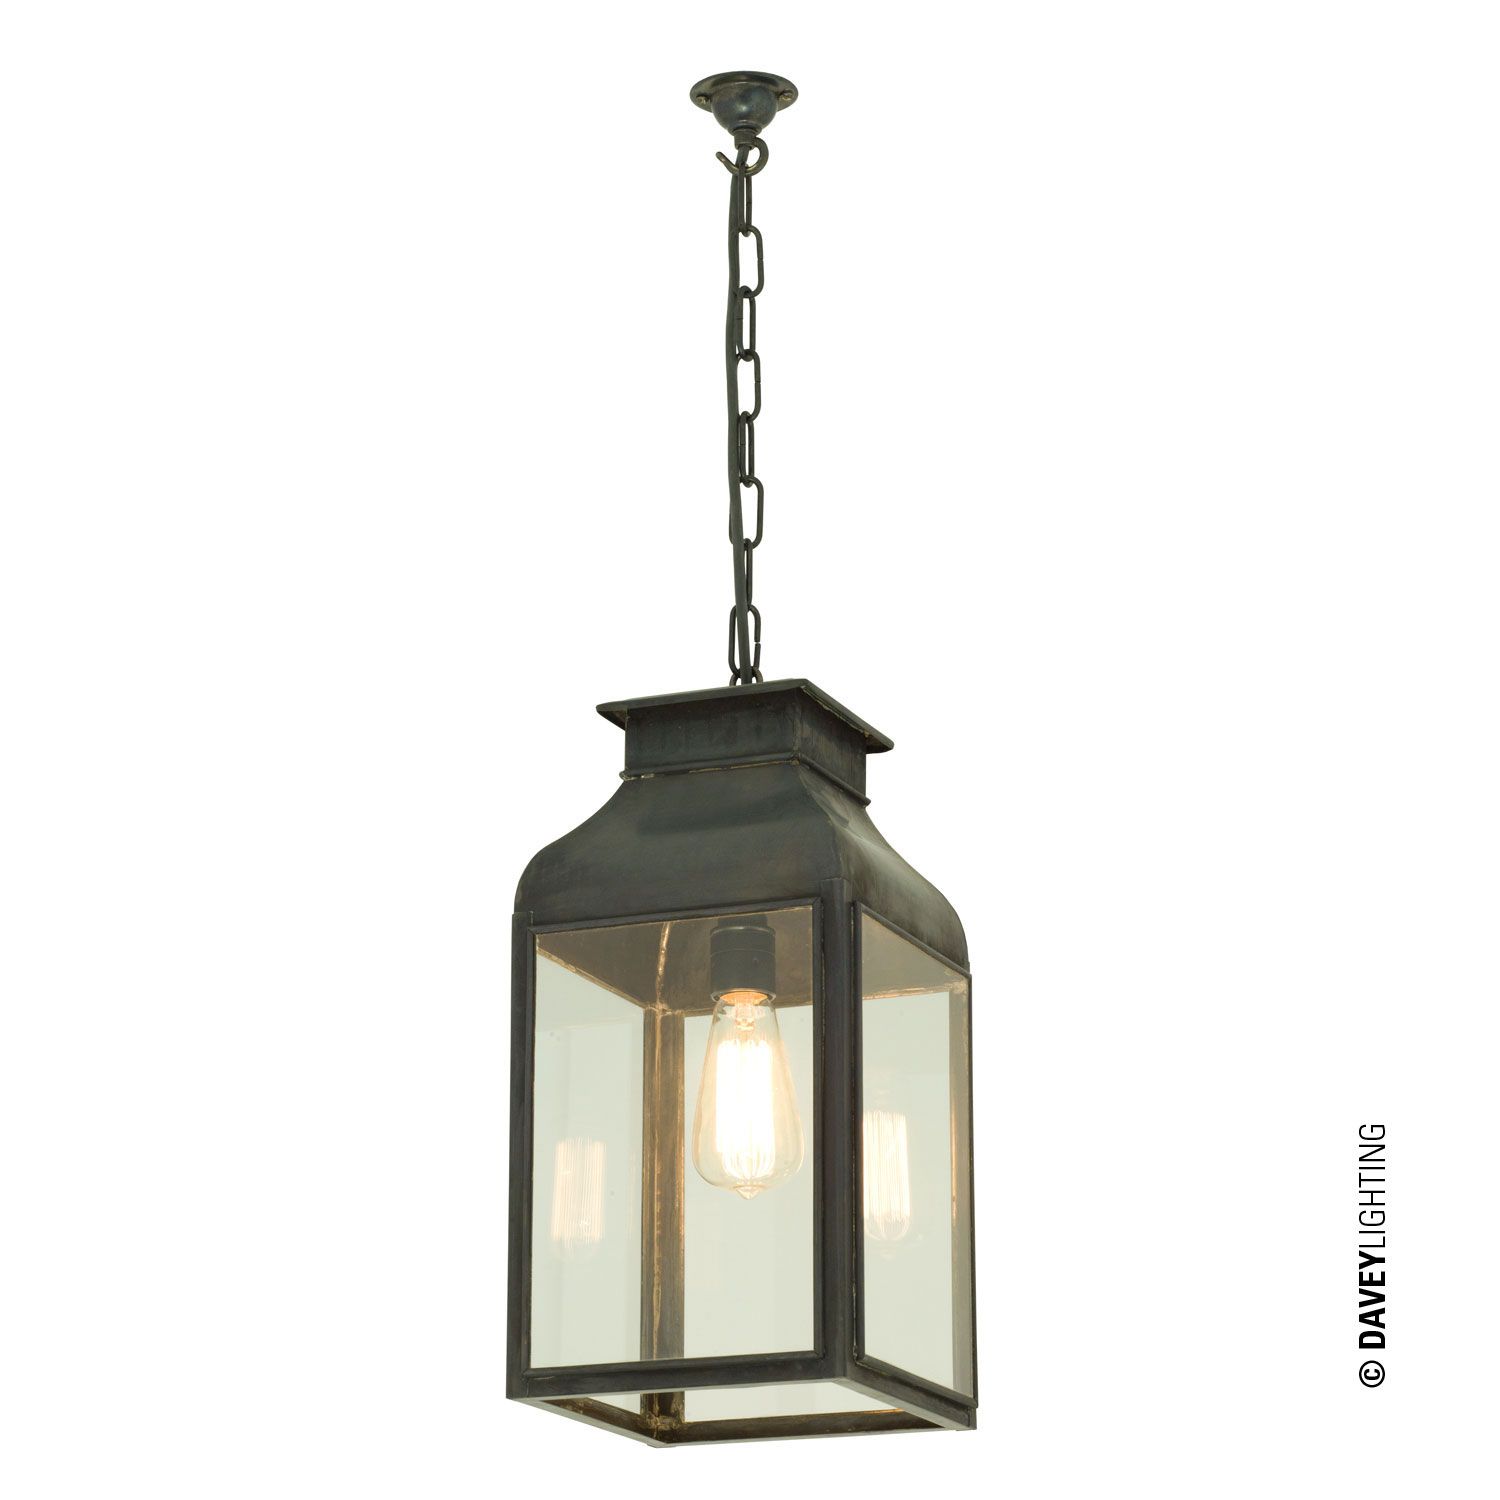 Pendant Lantern | Just Roof Lanterns For Lantern Chandeliers With Clear Glass (View 13 of 15)